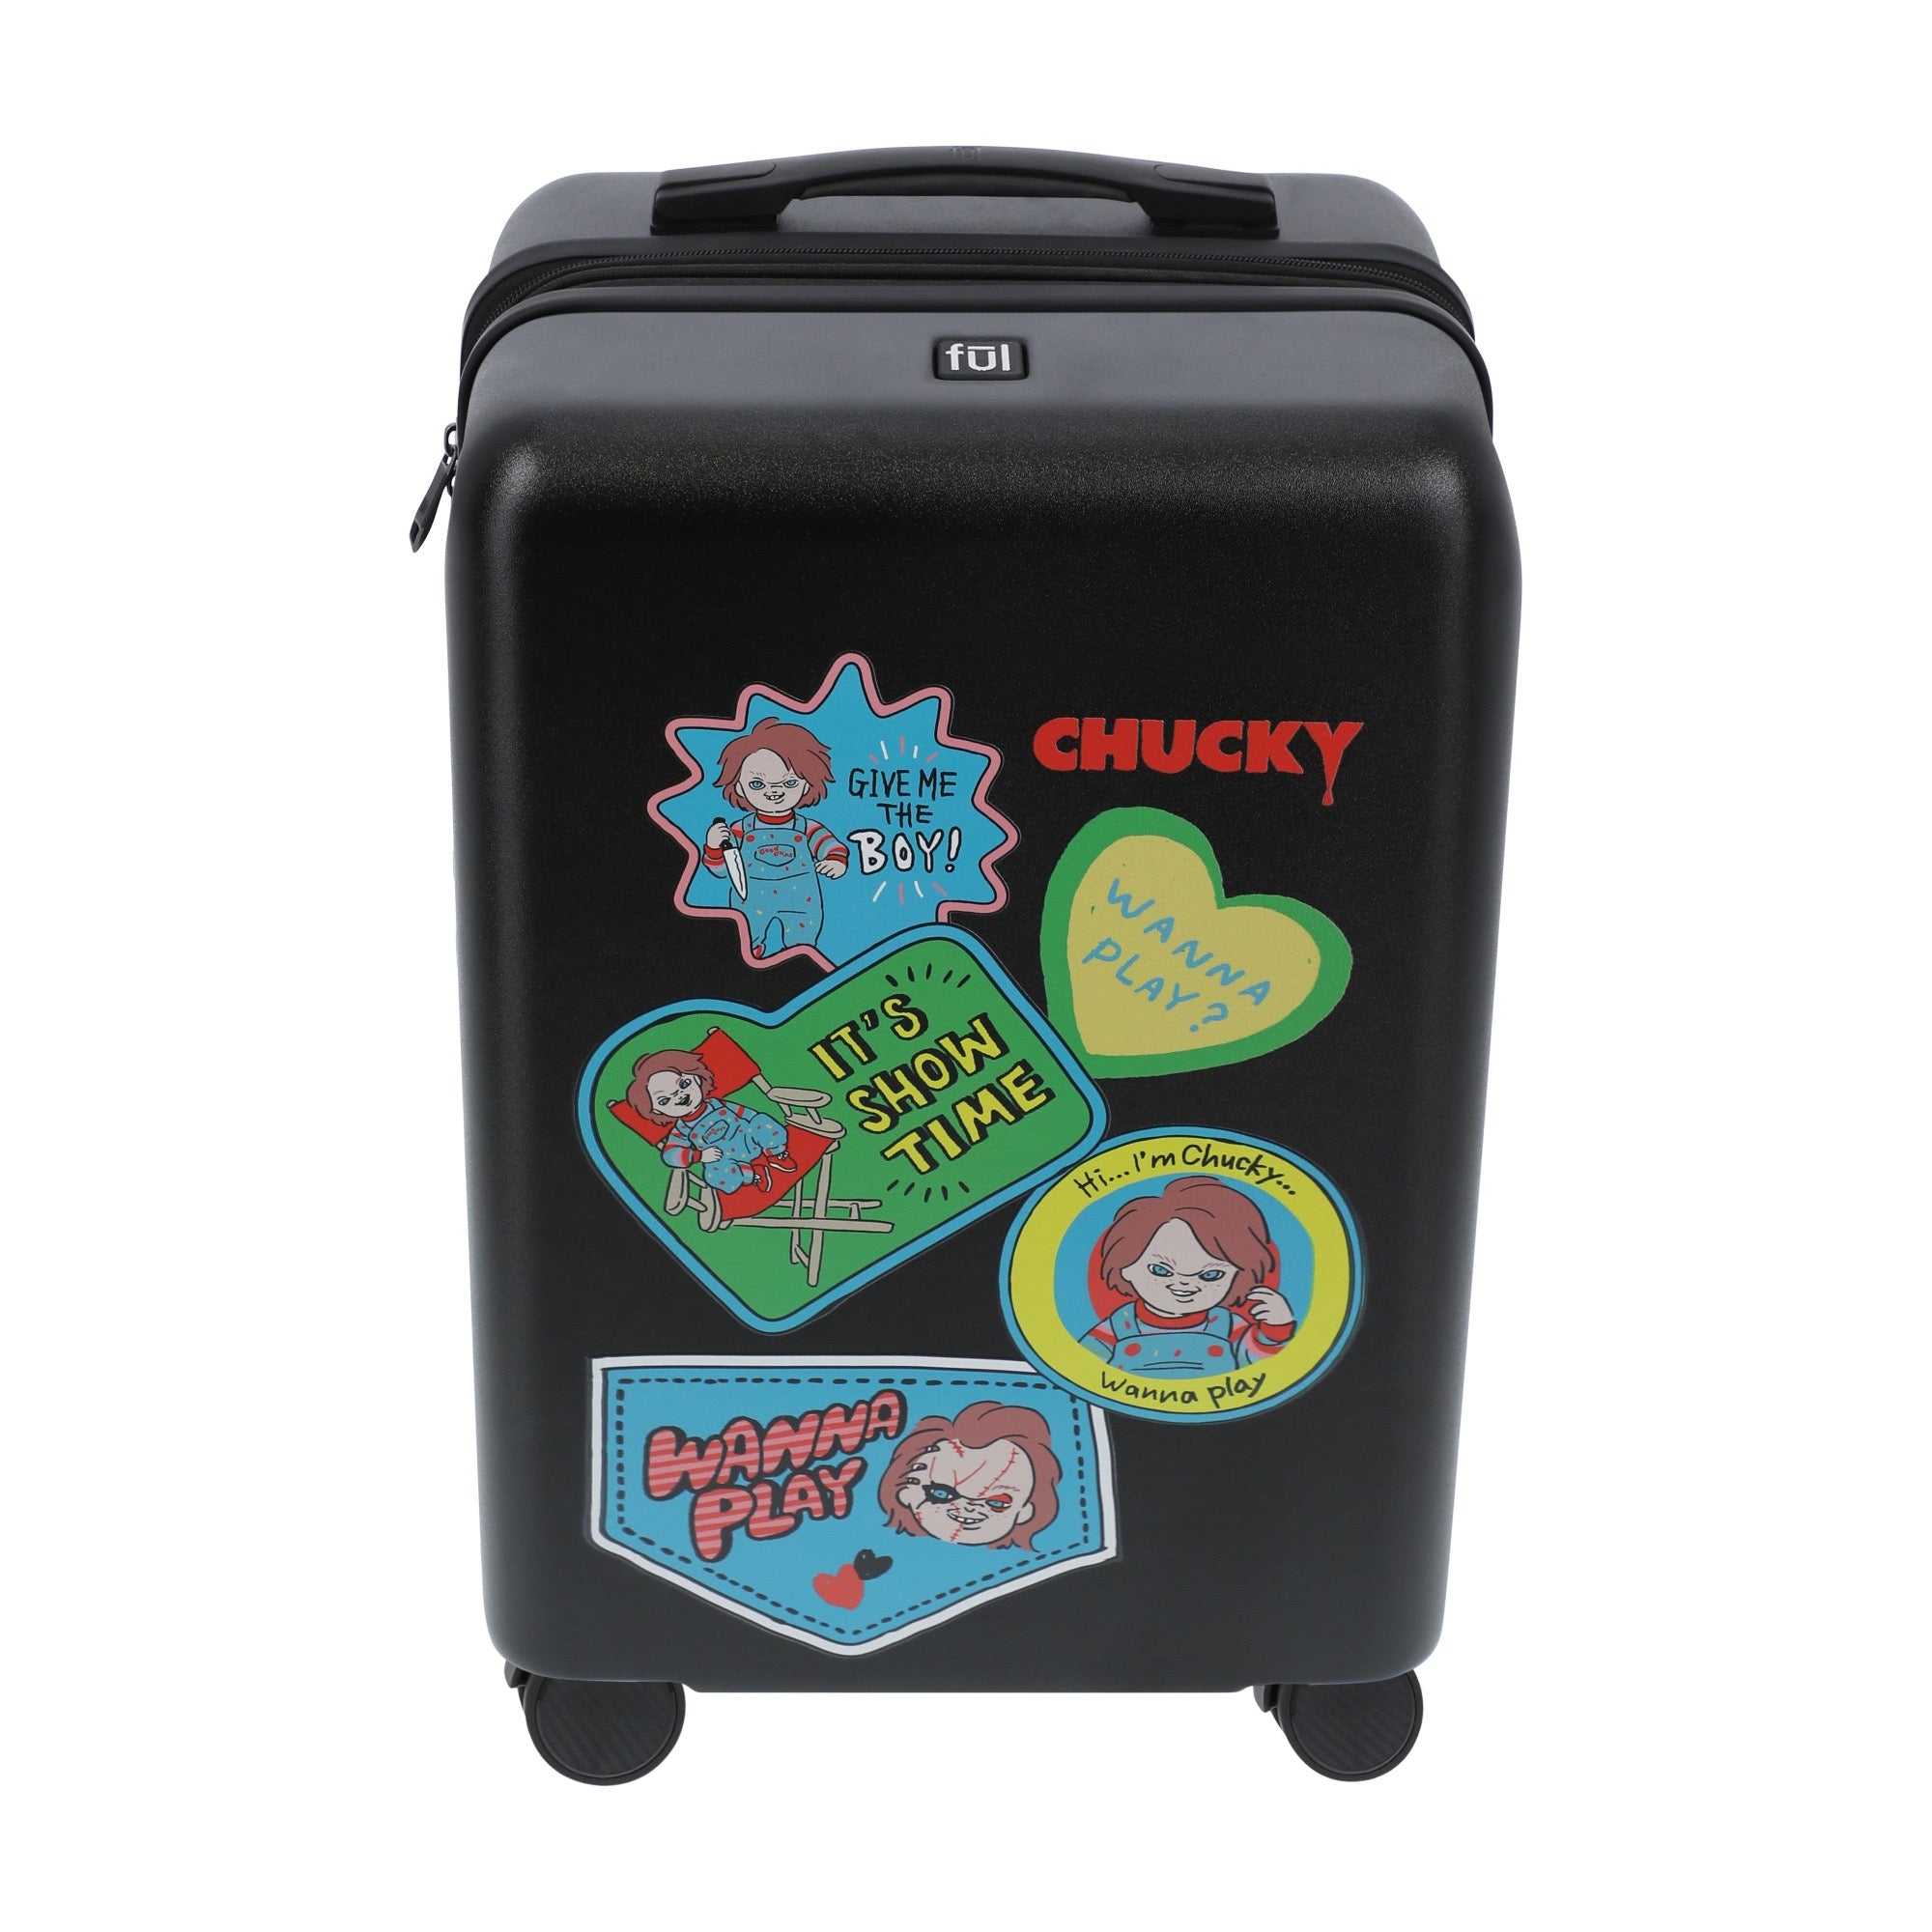 Black universal studios chucky 22.5" carry-on spinner suitcase luggage by Ful